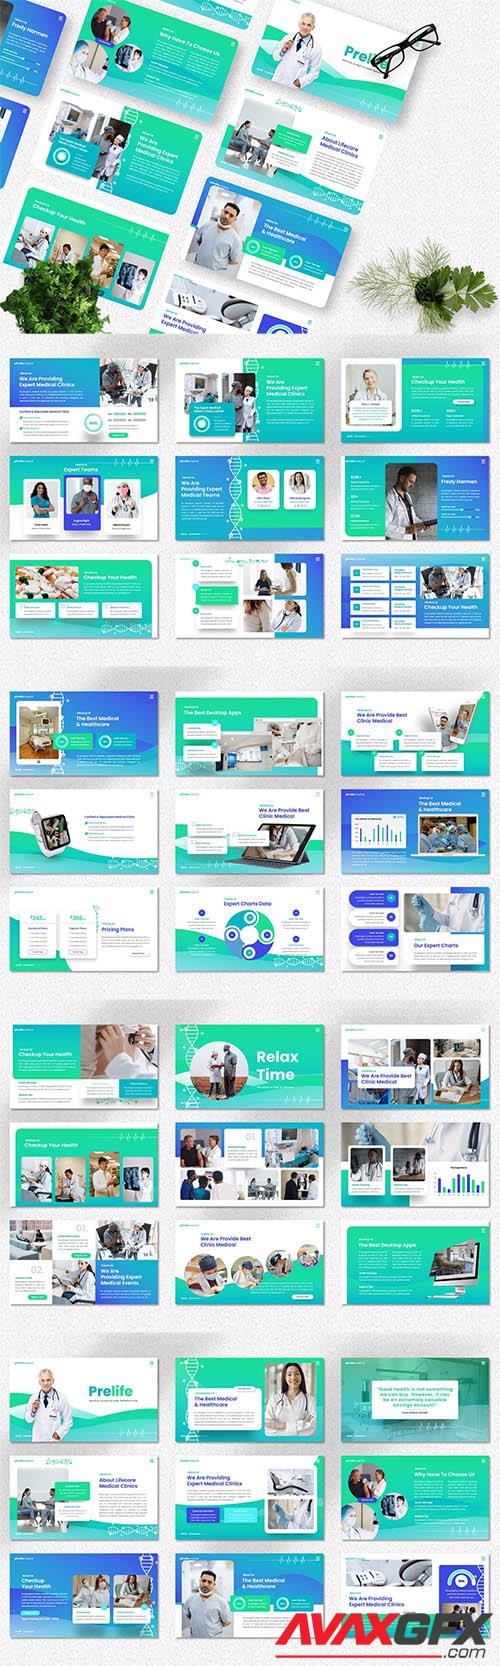 Prelife - Medical & Healthcare Powerpoint, Keynote and Google Slides Template